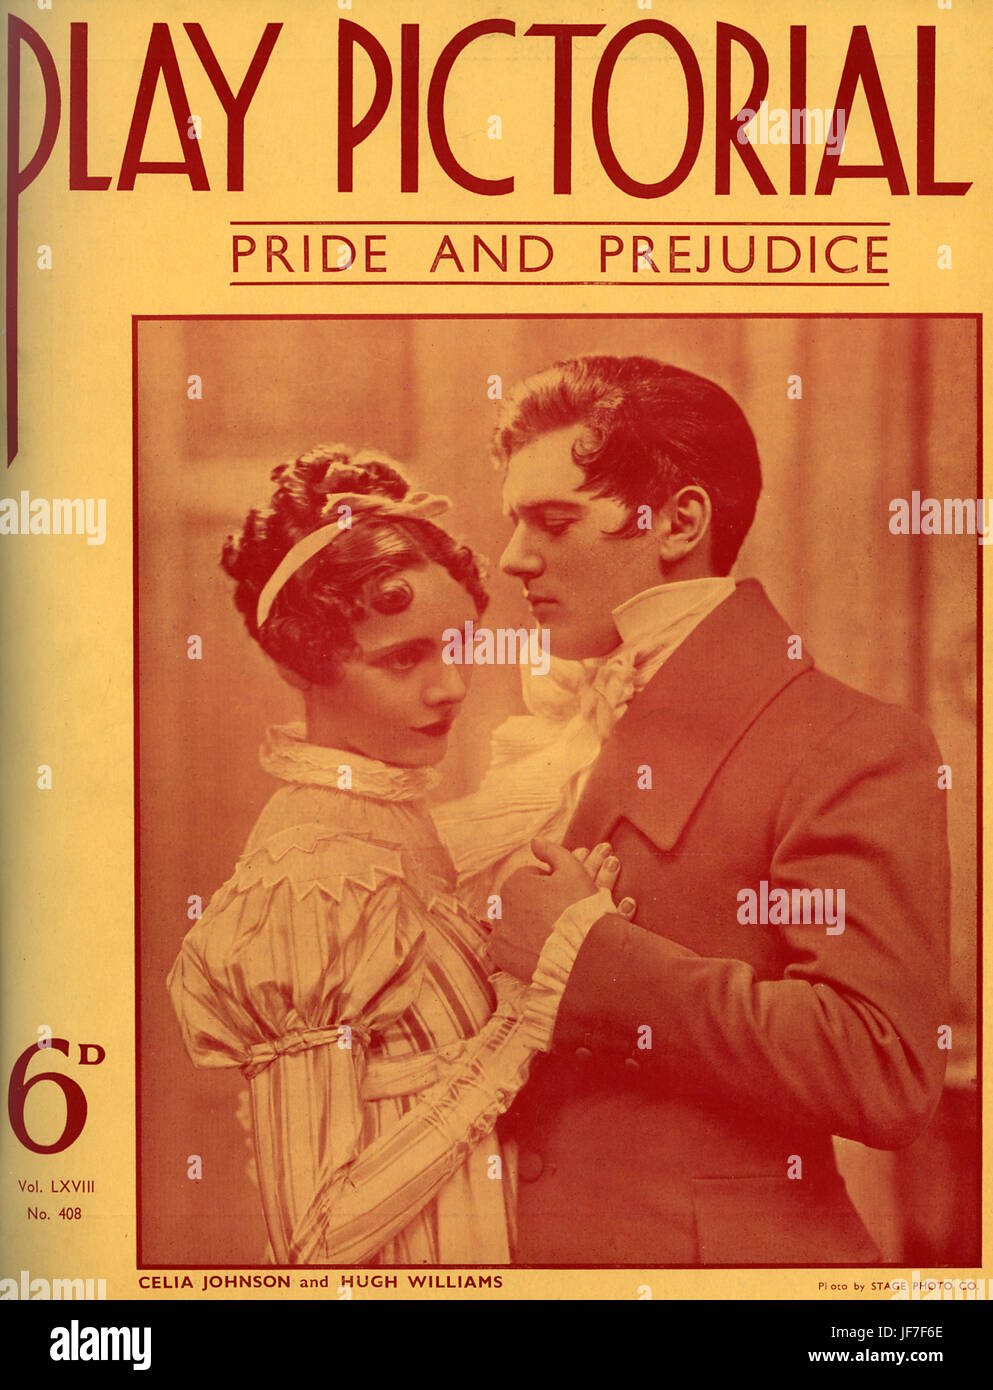 'Pride and Prejudice': Celia Johnson and Hugh Williams star in Gilbert Miller 's production of Jane Austen 's 'Pride and Prejudice' by Jane Austen, the St. James Theatre, London, 1936. Celia Johnson as Elizabeth Bennet, Hugh Williams as Mr Darcy, cover of 'Play Pictorial'. CJ, English actress, 18 December 1908 – 25 April 1982. Hugh Williams, English actor and dramatist, 6 March 1904 -  7 December 1969. Stock Photo